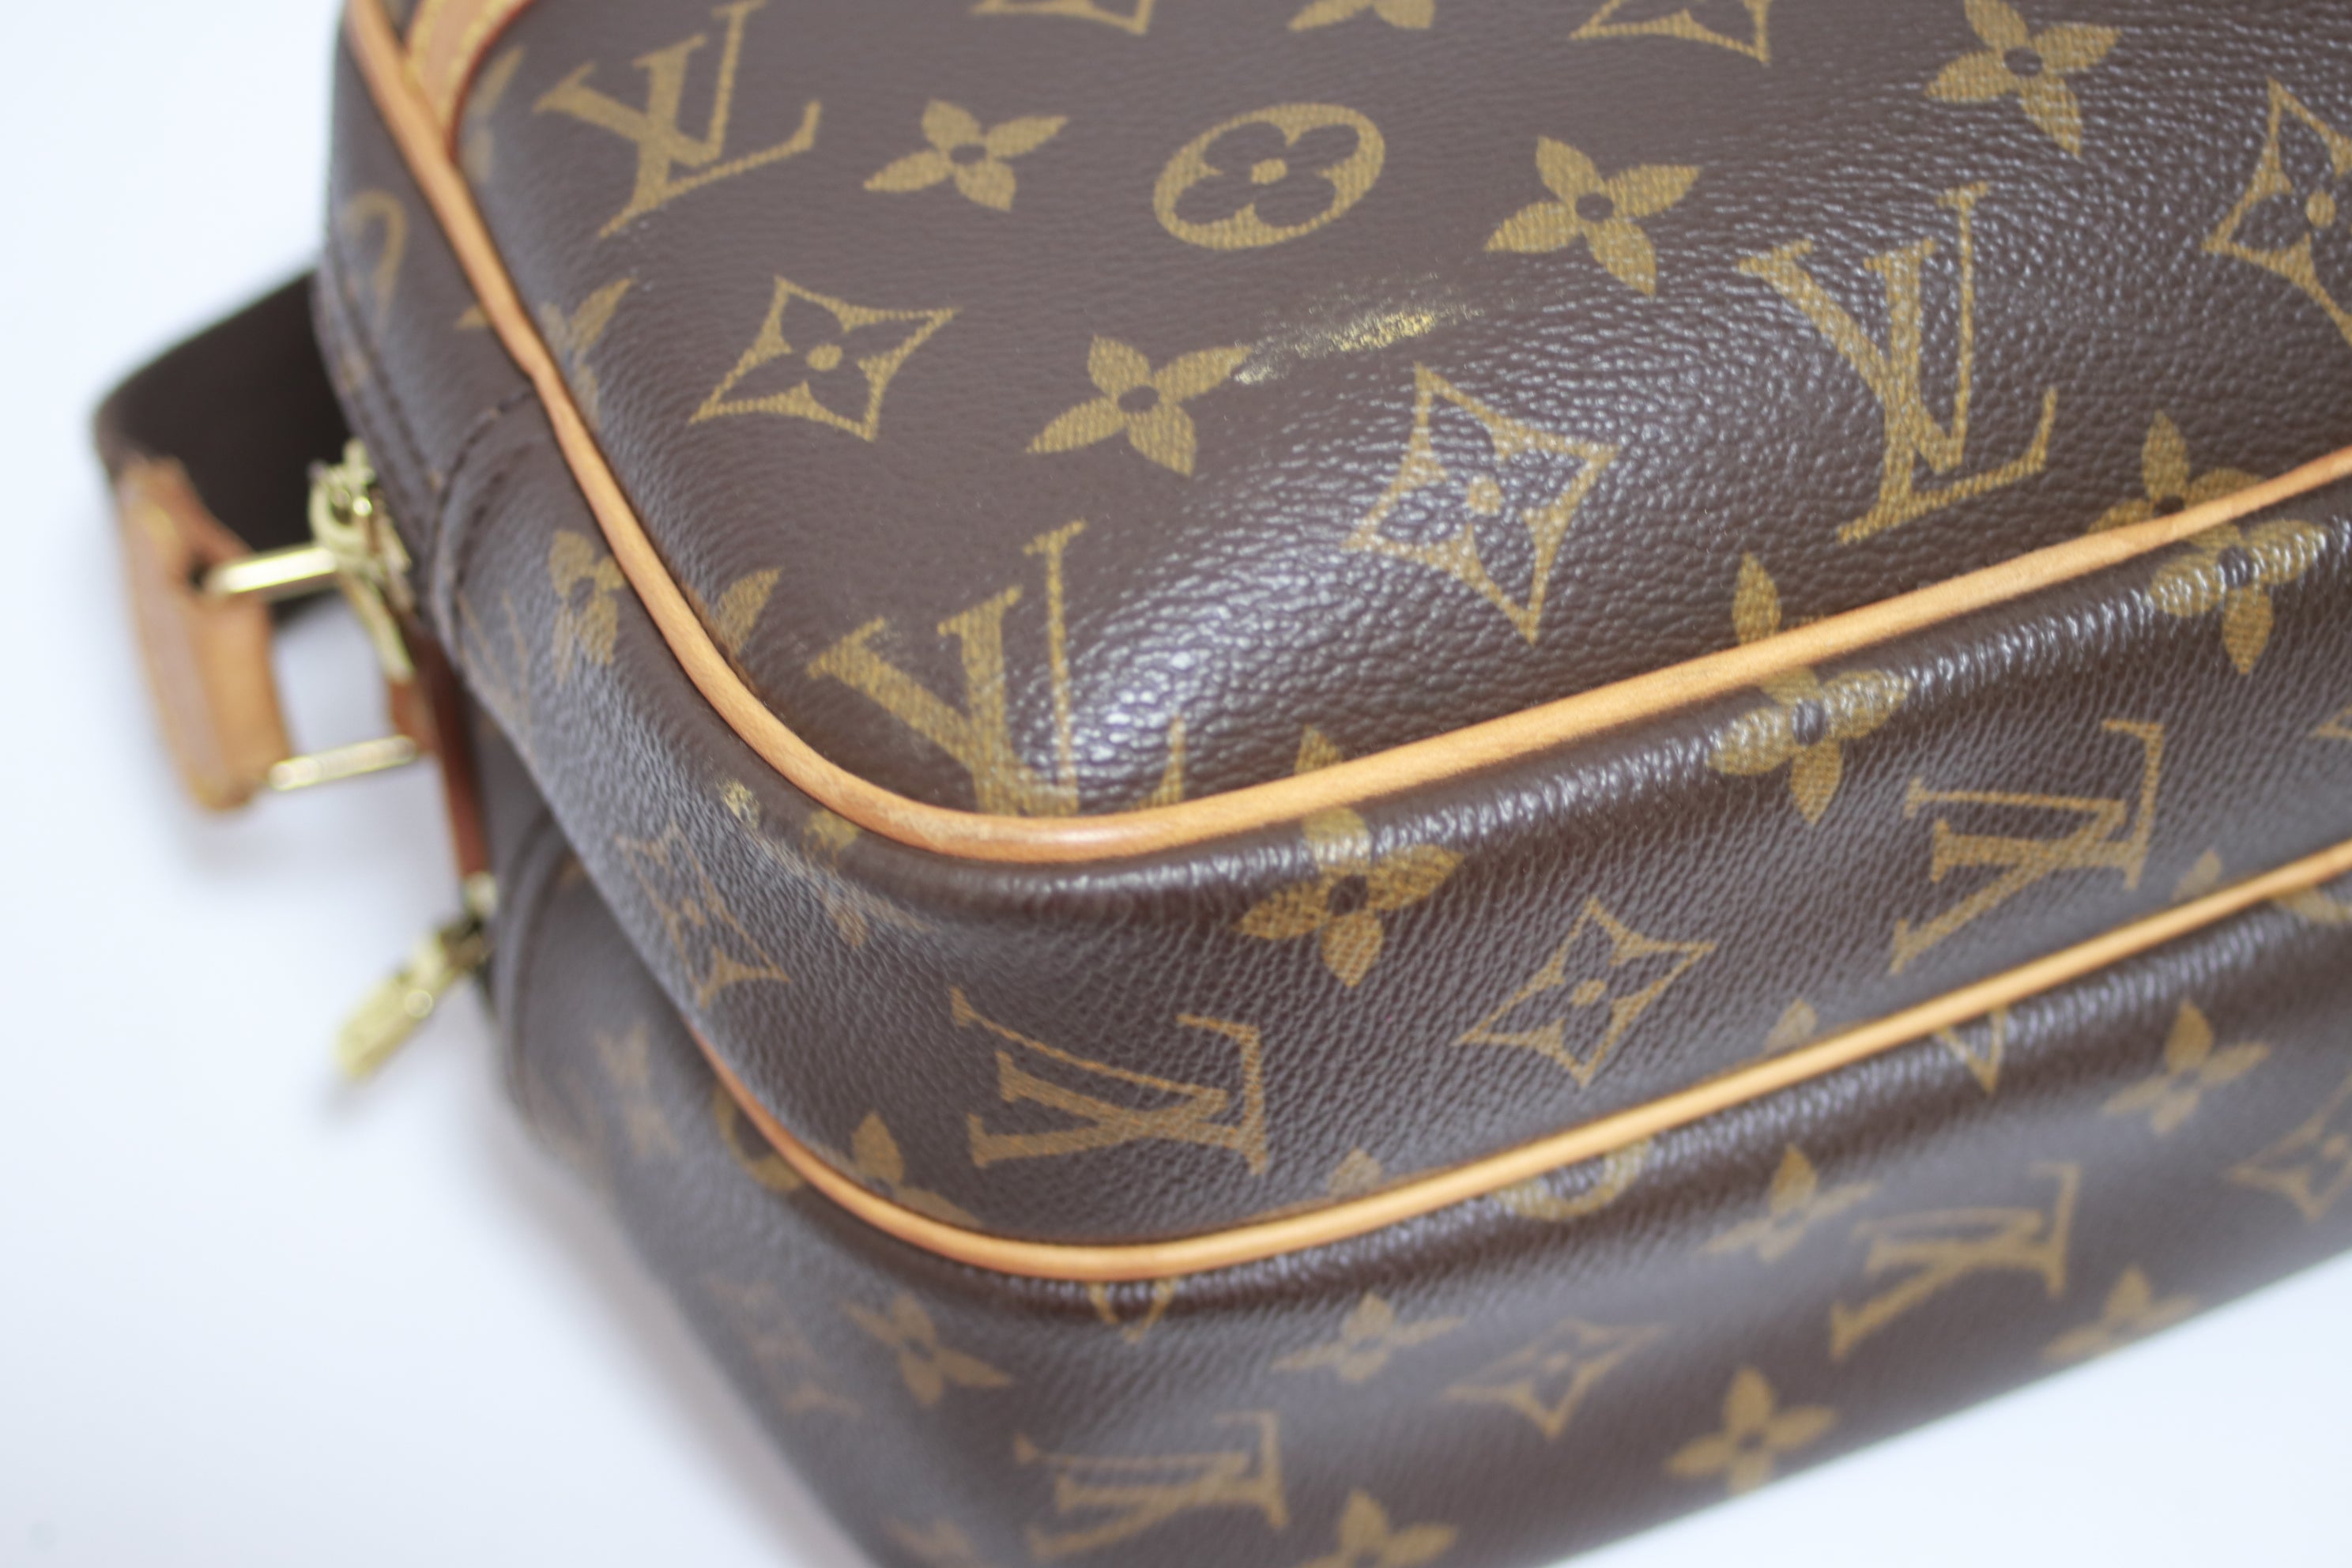 Louis Vuitton Reporter PM Messenger Bag Used (8329)